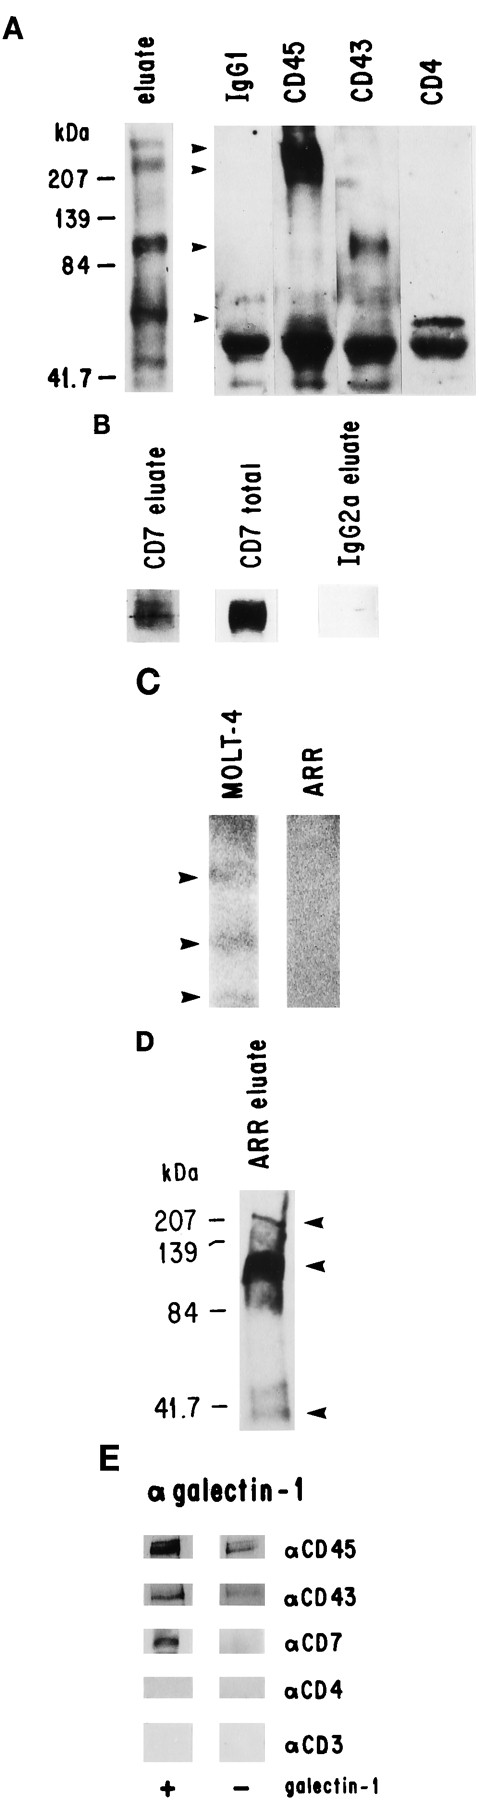 FIGURE 1. CD45, CD43, CD7, CD4, and CD3 bound to galectin-1. A, Galectin-1 binding proteins were isolated from MOLT-4 membrane proteins using galectin-1 affinity chromatography (eluate). Immunoprecipitations were performed on the eluate using the indicated mAbs or an isotype matched control. CD45, CD43, and CD4 are indicated by arrowheads. B, CD7 bound to galectin-1. Immunoprecipitations were performed on MOLT-4 membrane proteins before galectin-1 affinity chromatography (total) or on the eluate from the galectin-1 affinity column (eluate) using a CD7 Ab or an isotype matched control. C, Bands corresponding to the Mr of components of the CD3 complex were present in the eluate isolated from the CD3+ T cell line MOLT-4, but absent from the eluate isolated from the CD3− T cell line ARR. Arrowheads indicate the 28-, 20-, and 16-kDa bands present in the MOLT-4 lane, but absent in the ARR lane. The area shown is taken from the ARR lane shown in D. The MOLT-4 sample was exposed for 15 s and the ARR sample was exposed for 6 min. D, The ARR cell surface glycoproteins CD45R0, CD43, and CD7 (arrowheads) bound to galectin-1. E, CD45, CD43, and CD7, but not CD4 and CD3 coimmunoprecipitated with galectin-1 from MOLT-4 cells treated with galectin-1 (+ galectin-1), but not from MOLT-4 cells not treated with galectin-1 (− galectin-1).